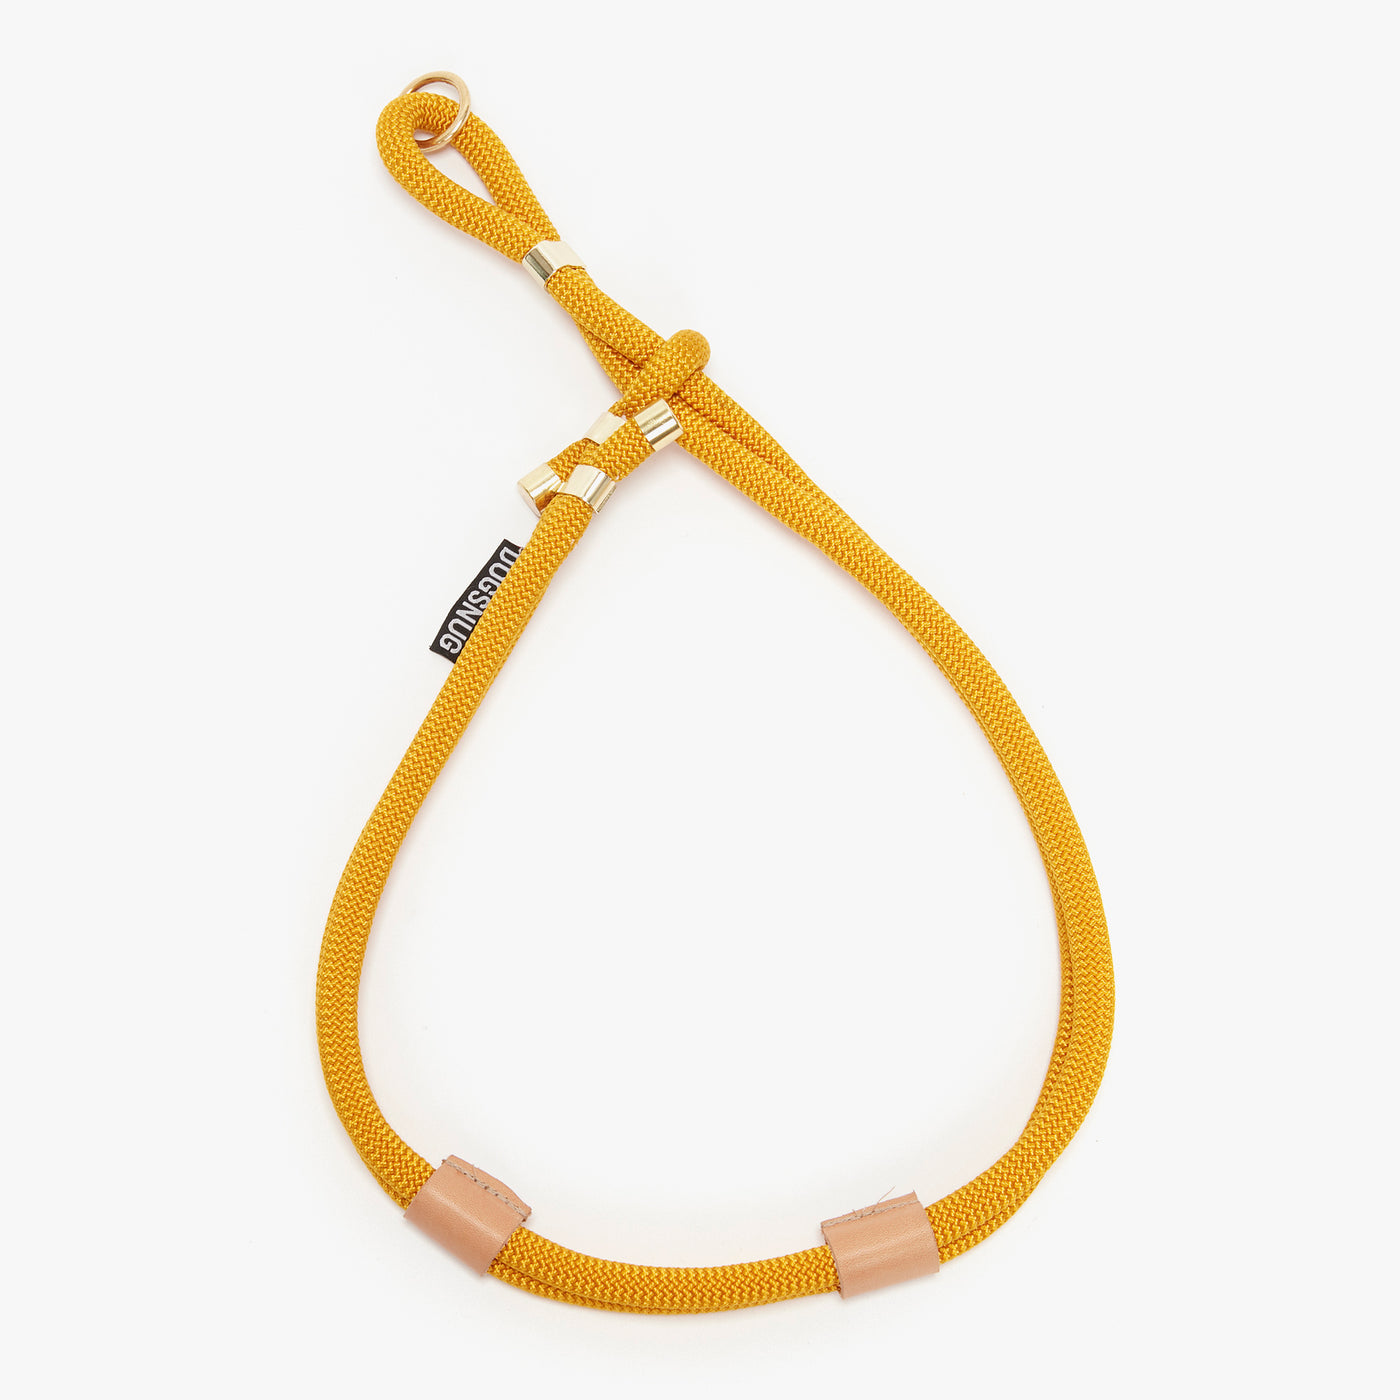 Dog rope harness in yellow 